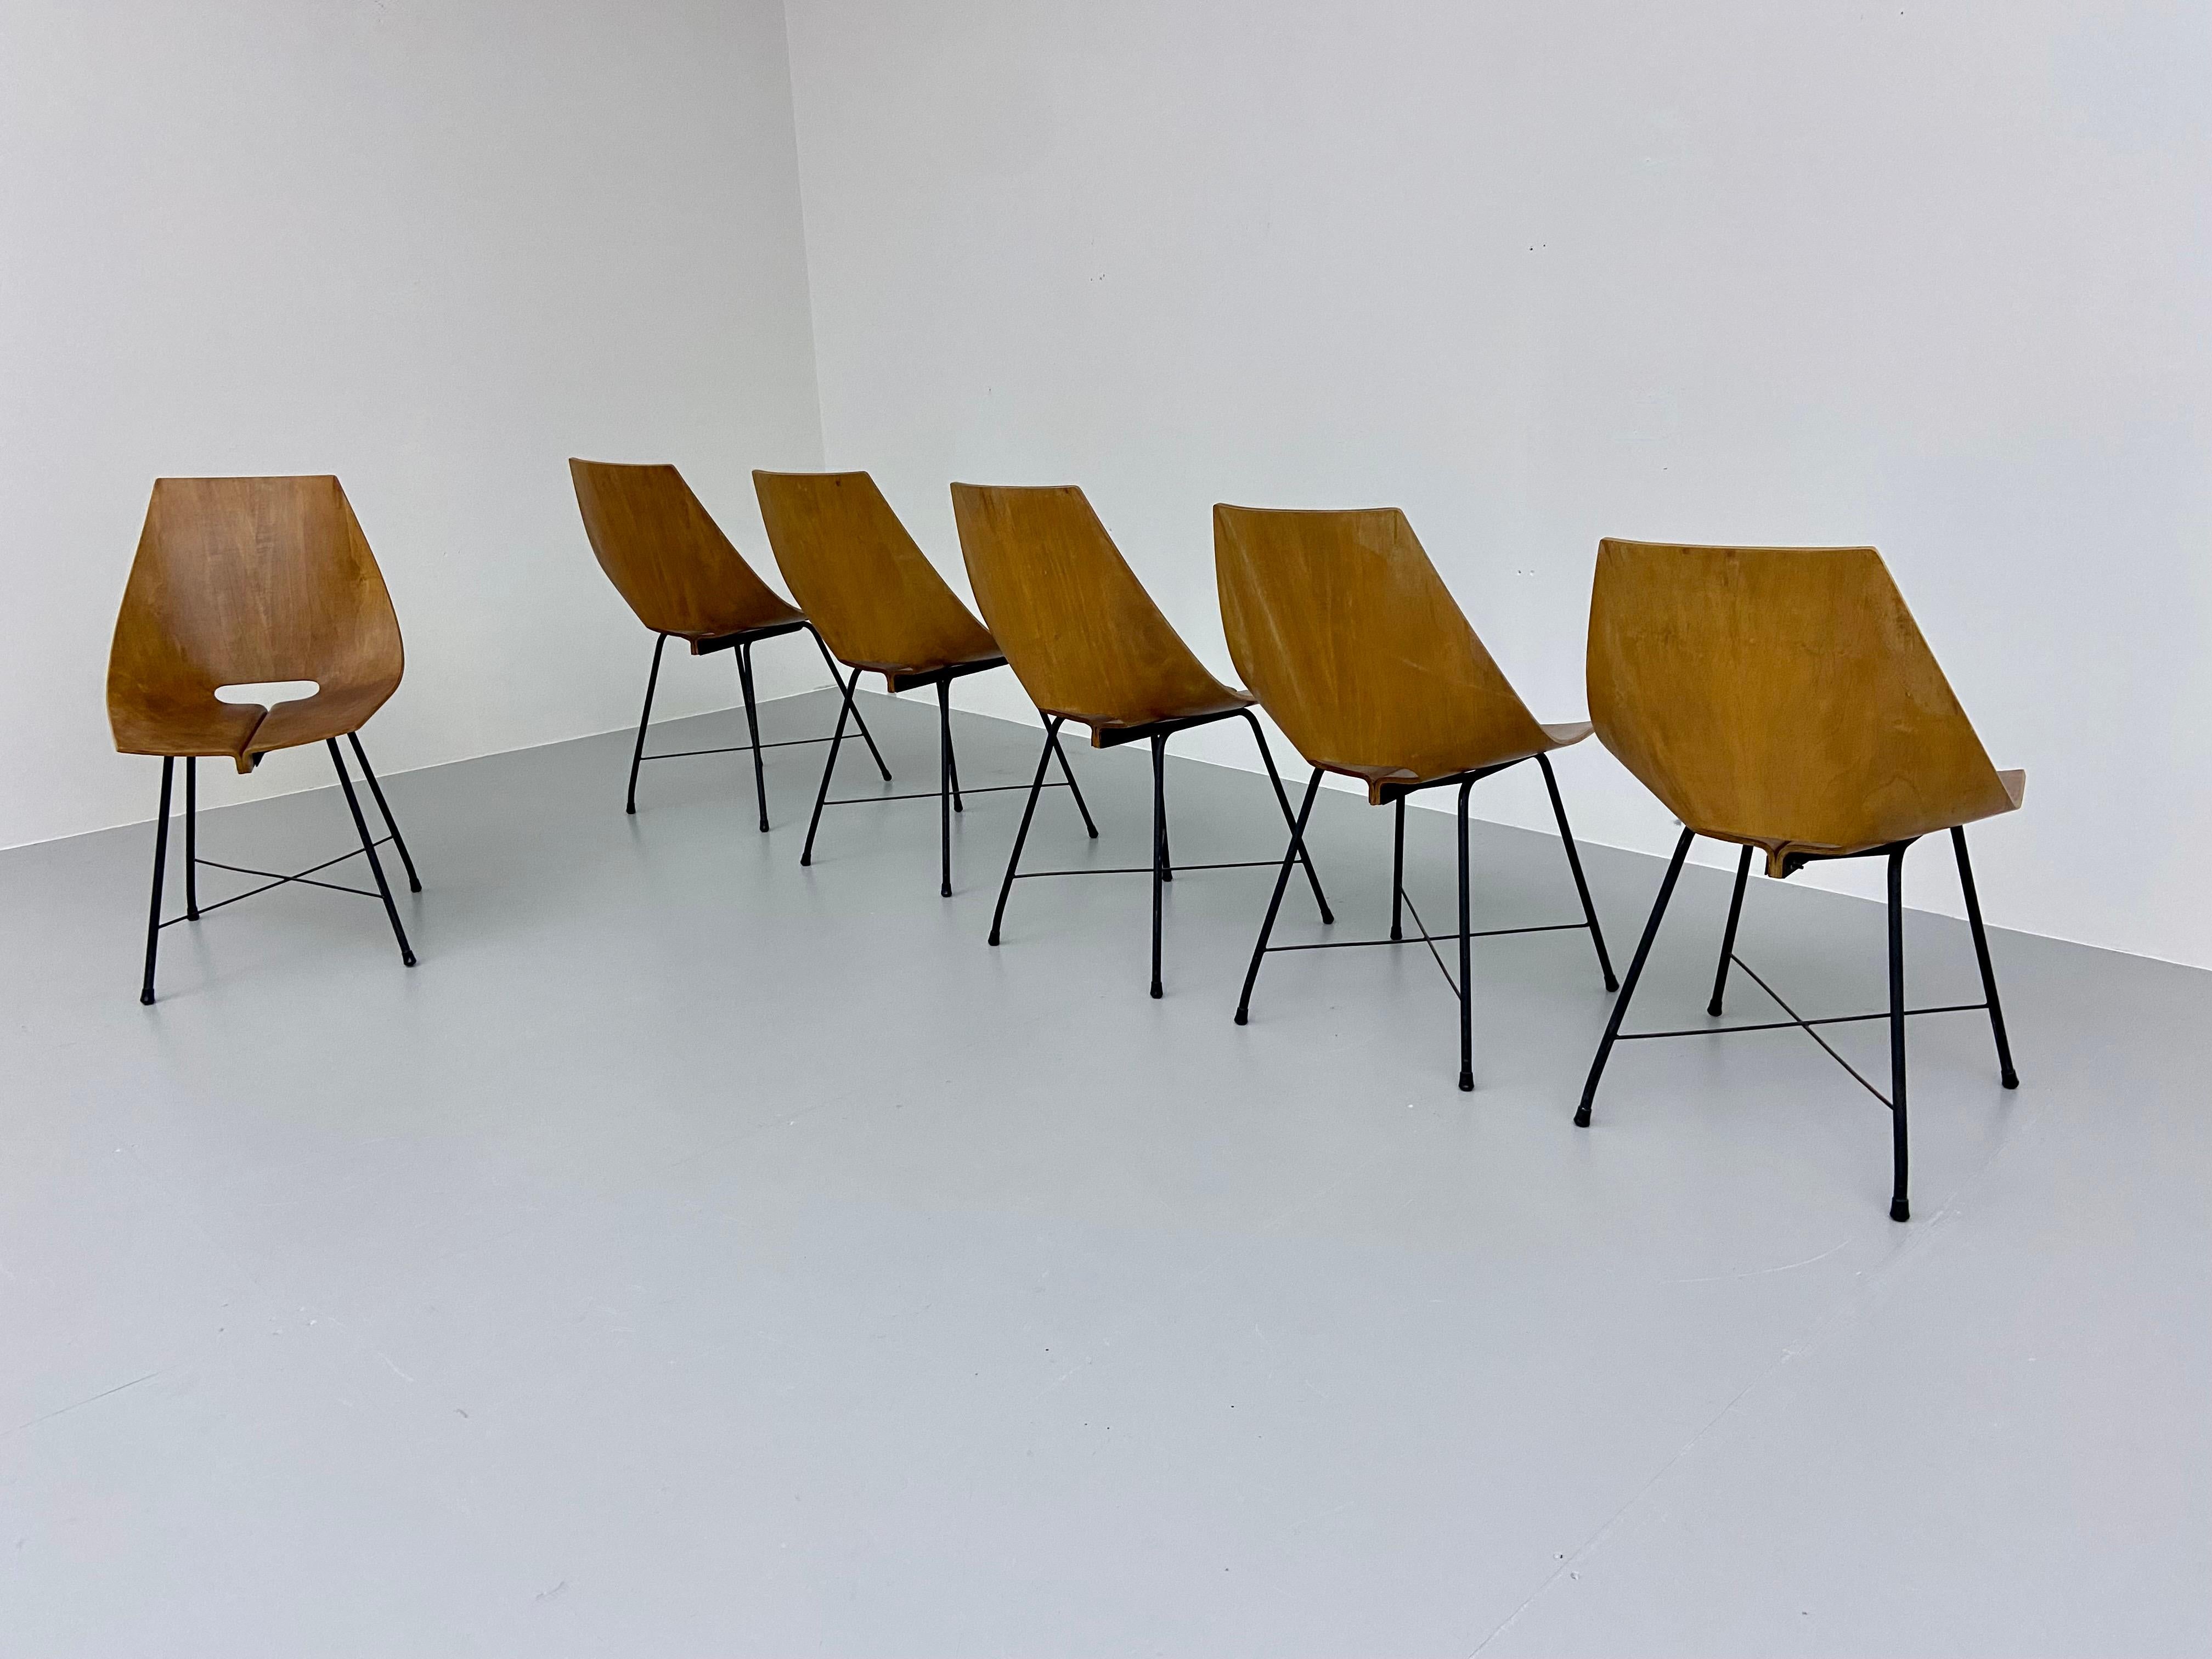 Set of 6 Dining Room Chairs by Carlo Ratti in Bended Wood and Metal, Italy, 1954 For Sale 4